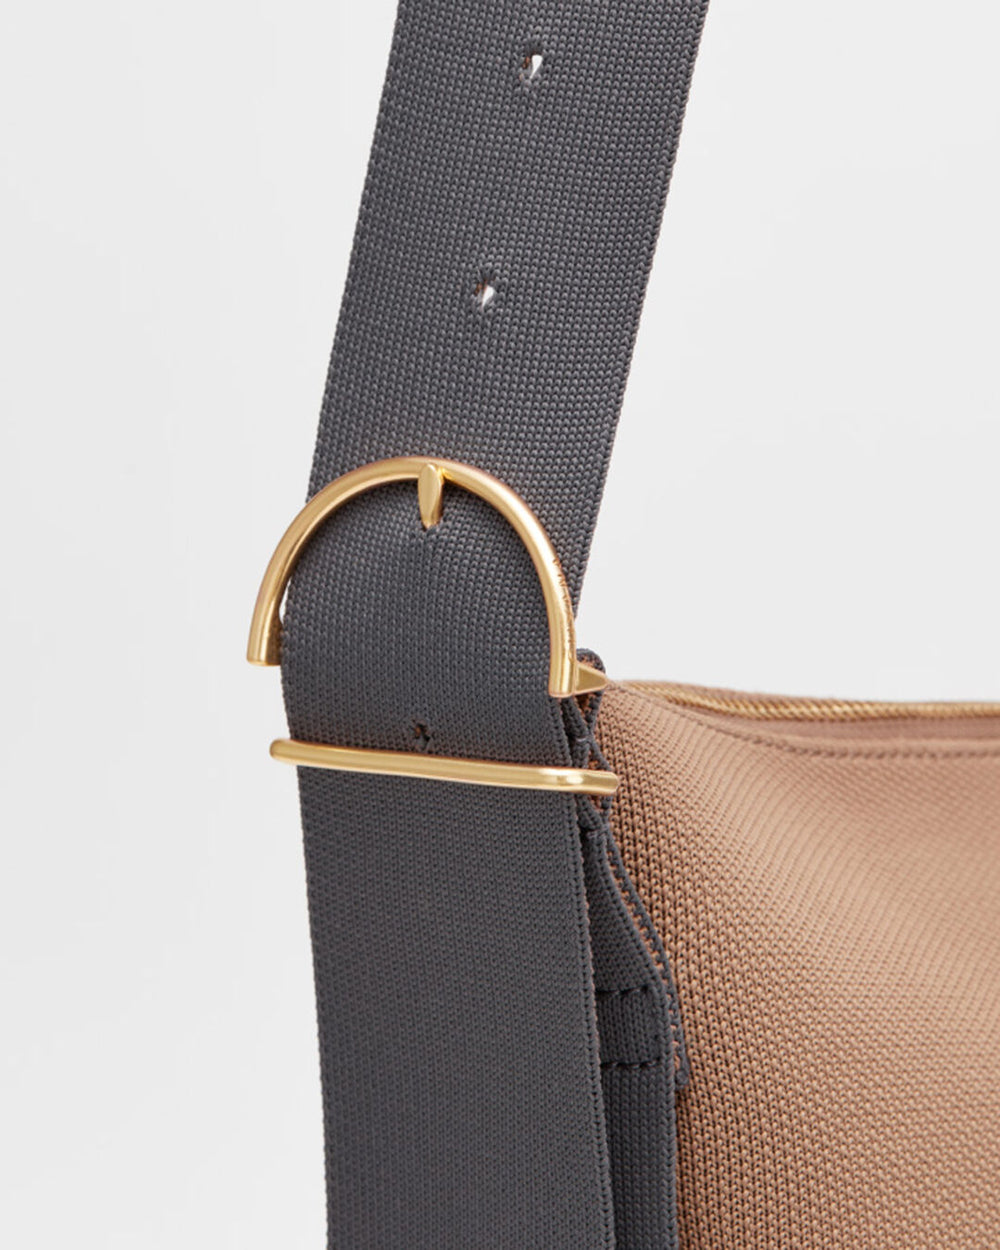 Close-up of a bag strap with a metal buckle.